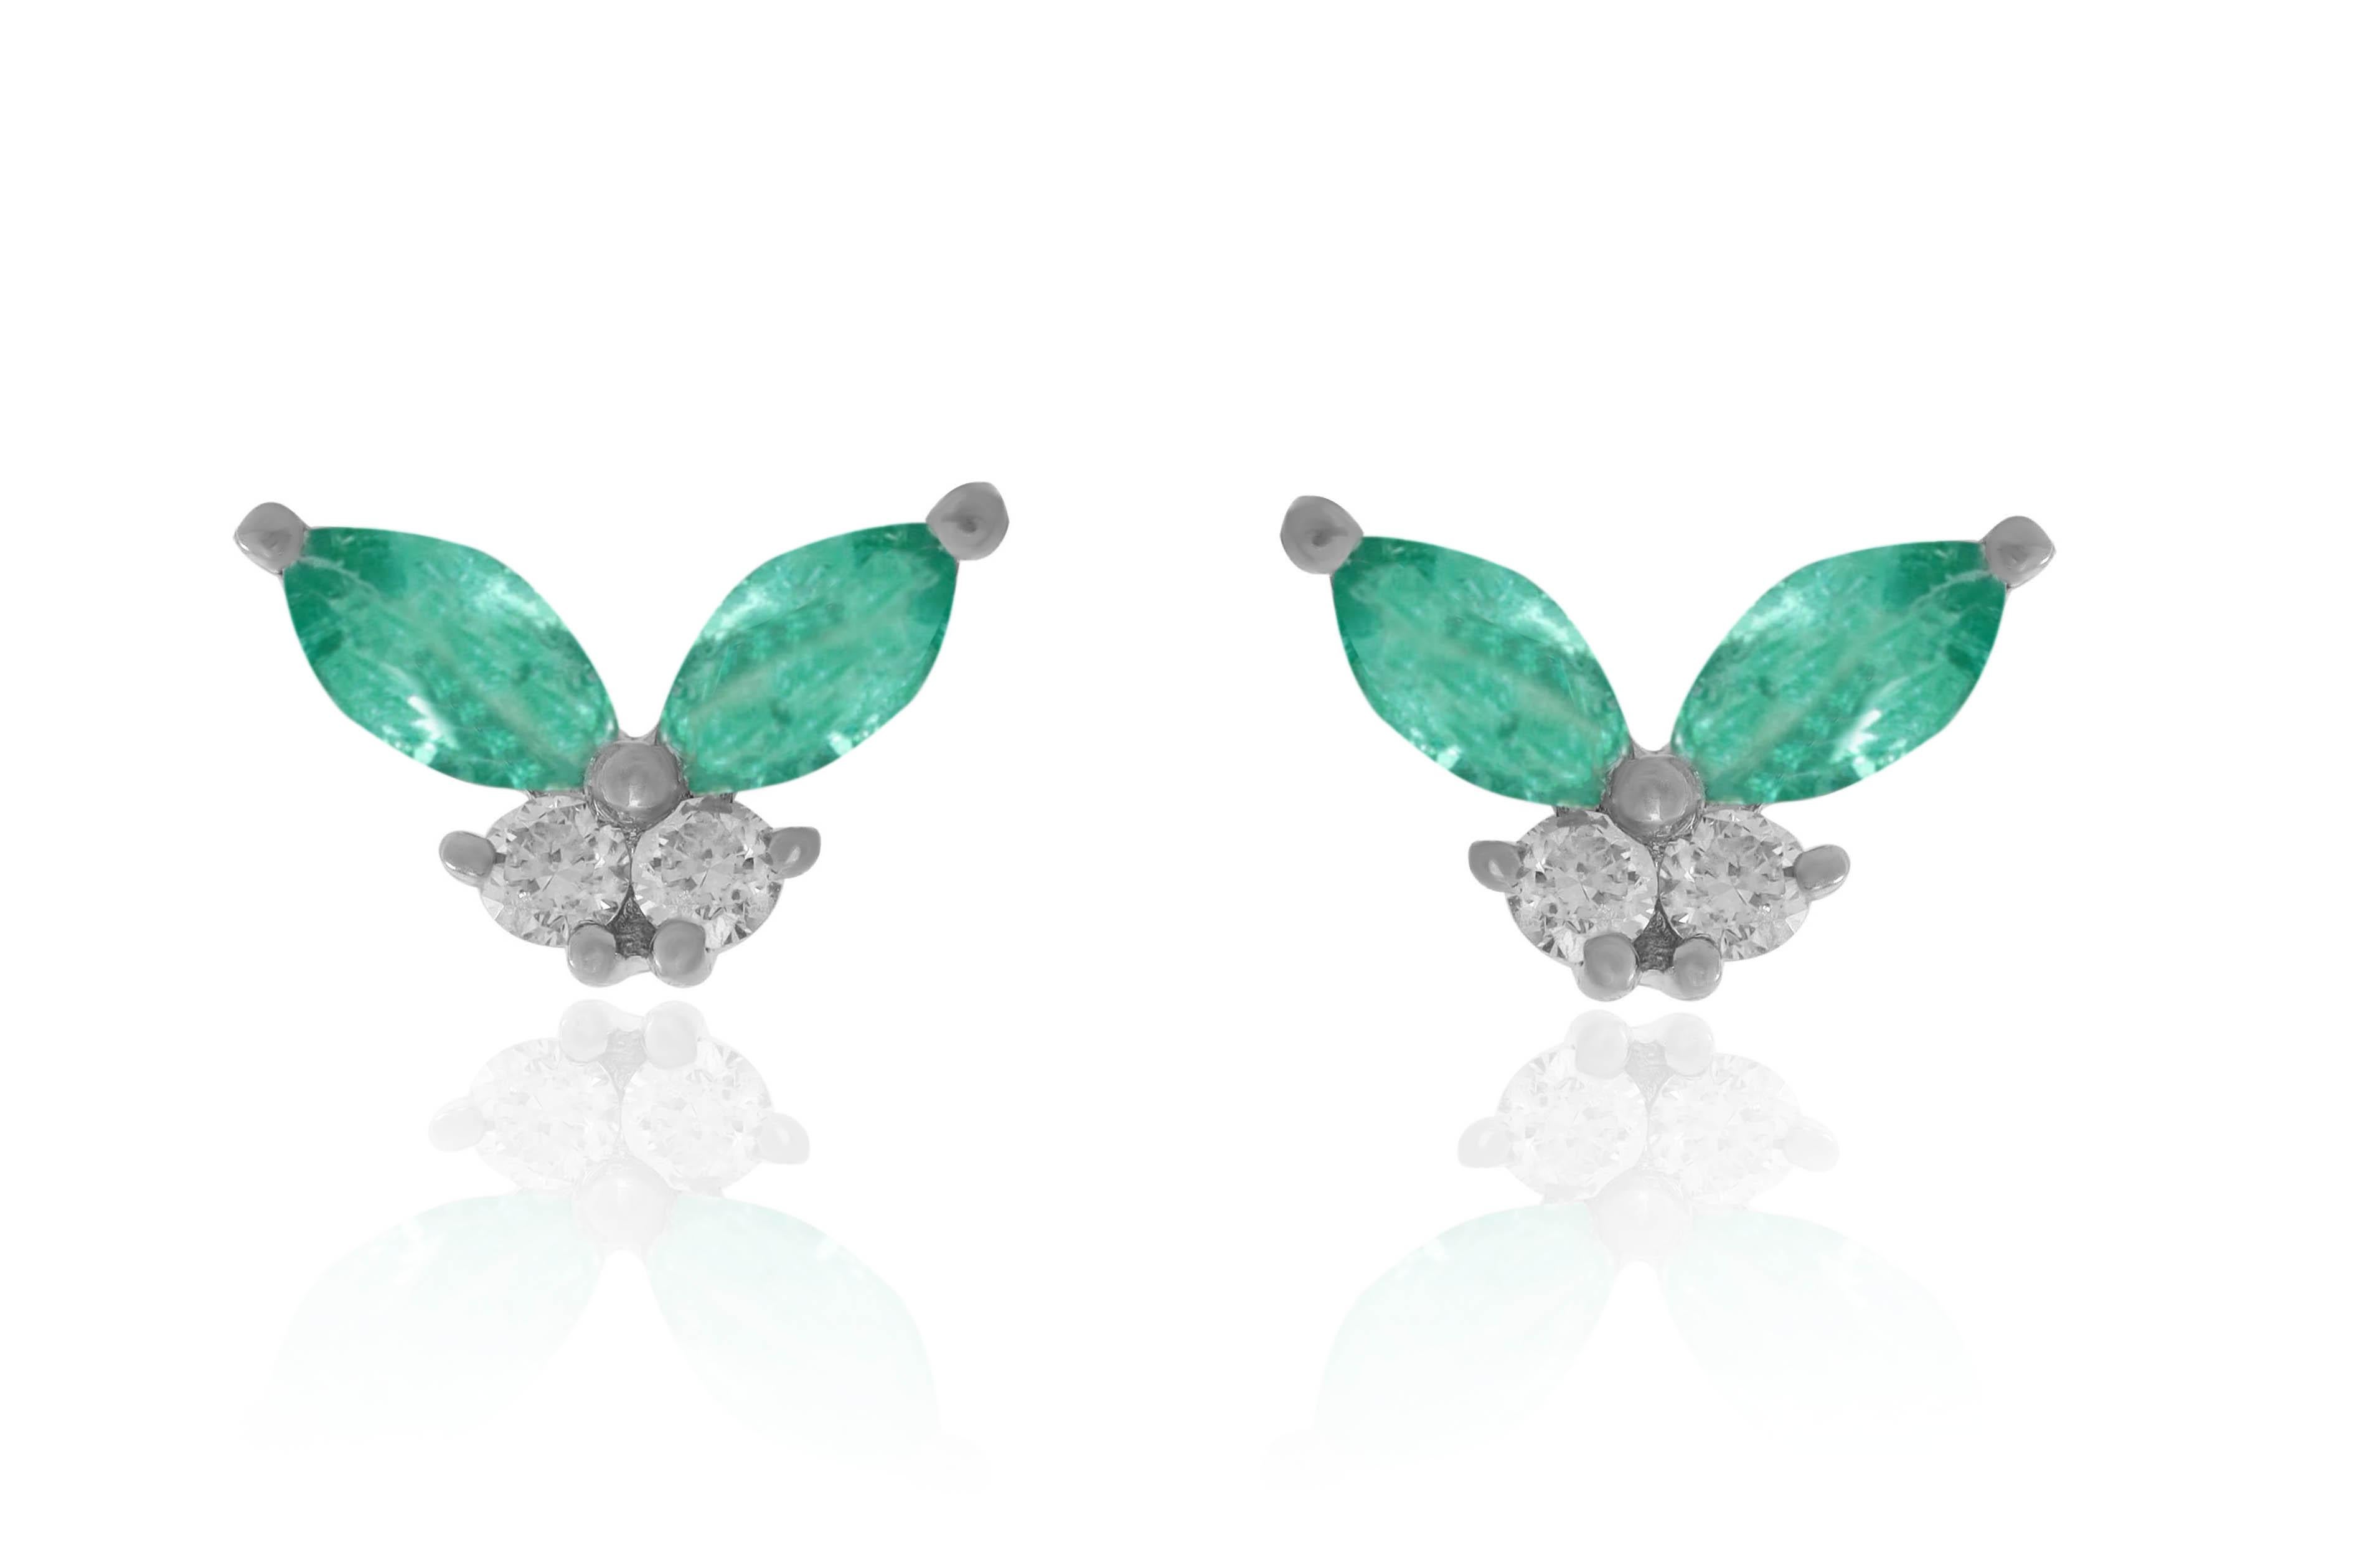 14K White Gold Diamond and Emerald Earrings featuring 0.07 Carats of Diamonds and 0.27 Carats of Emeralds
Underline your look with this sharp 14K White gold shape Diamond Earrings. High quality Diamonds. This Earrings will underline your exquisite